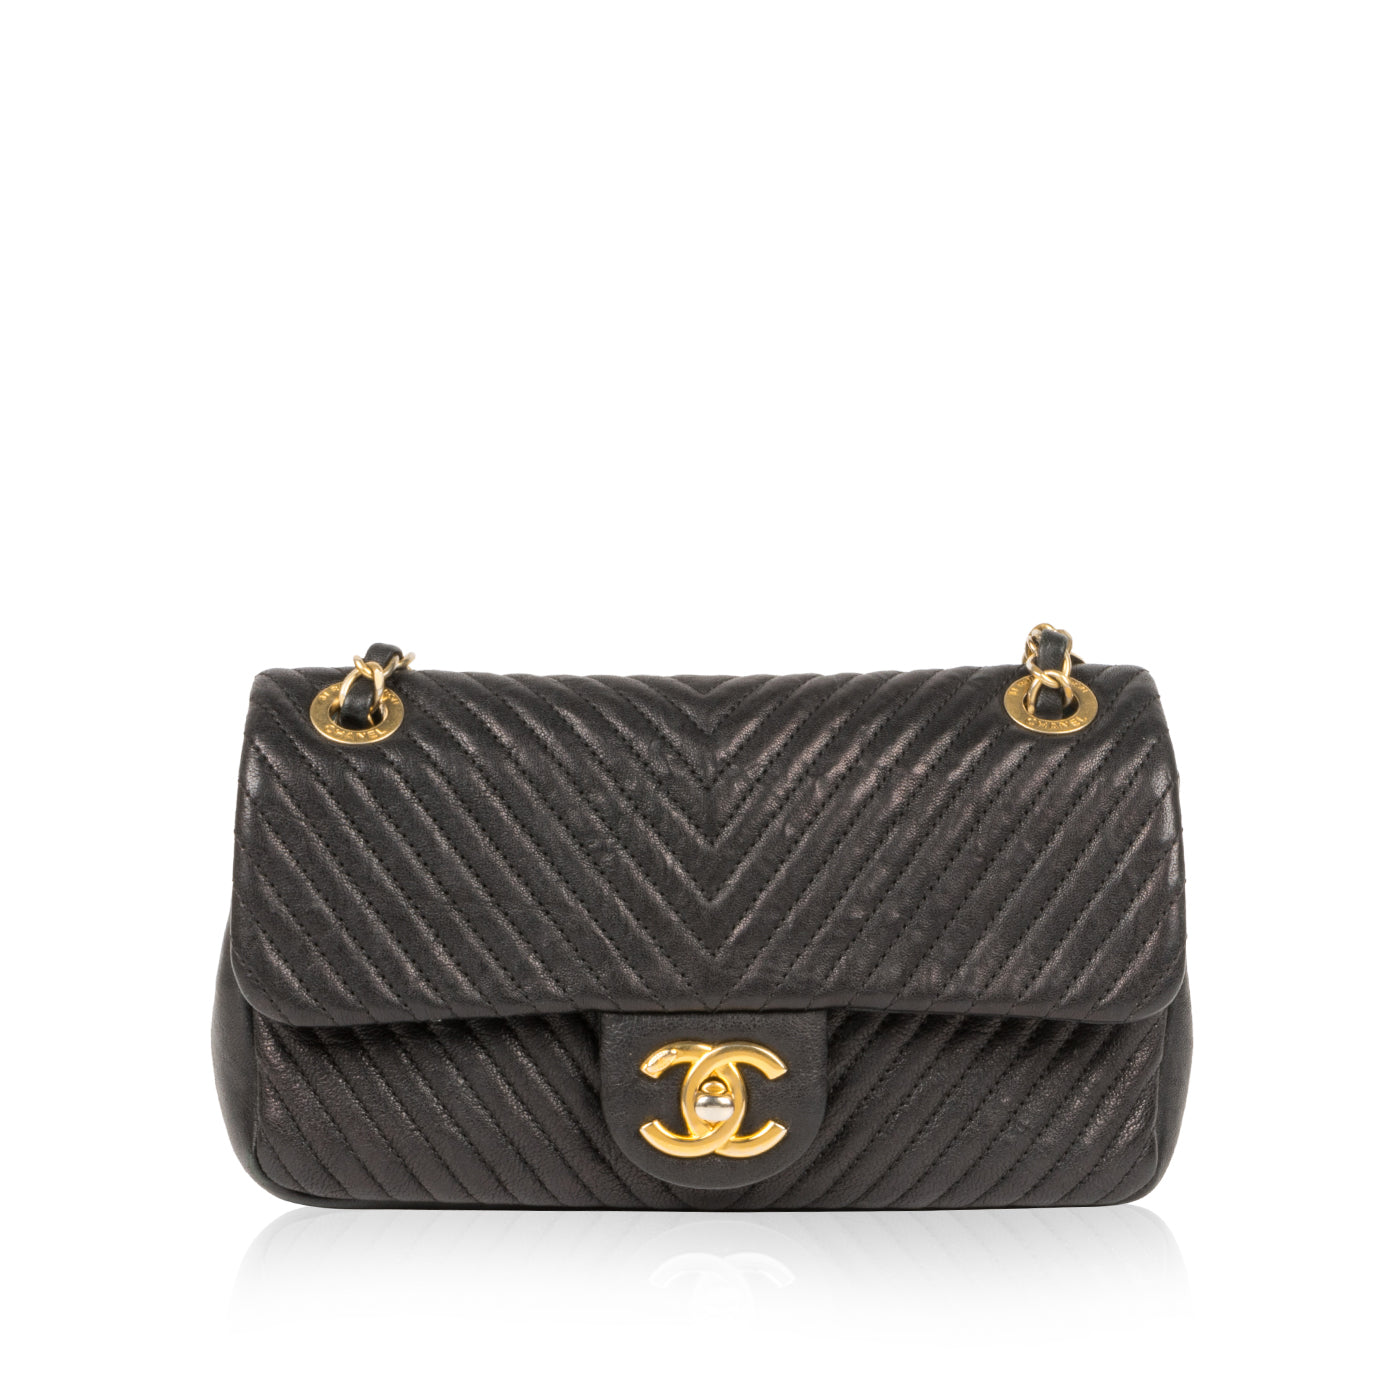 Chanel - Chevron Single Flap Bag - Aged Gold Hardware - Pre-Loved